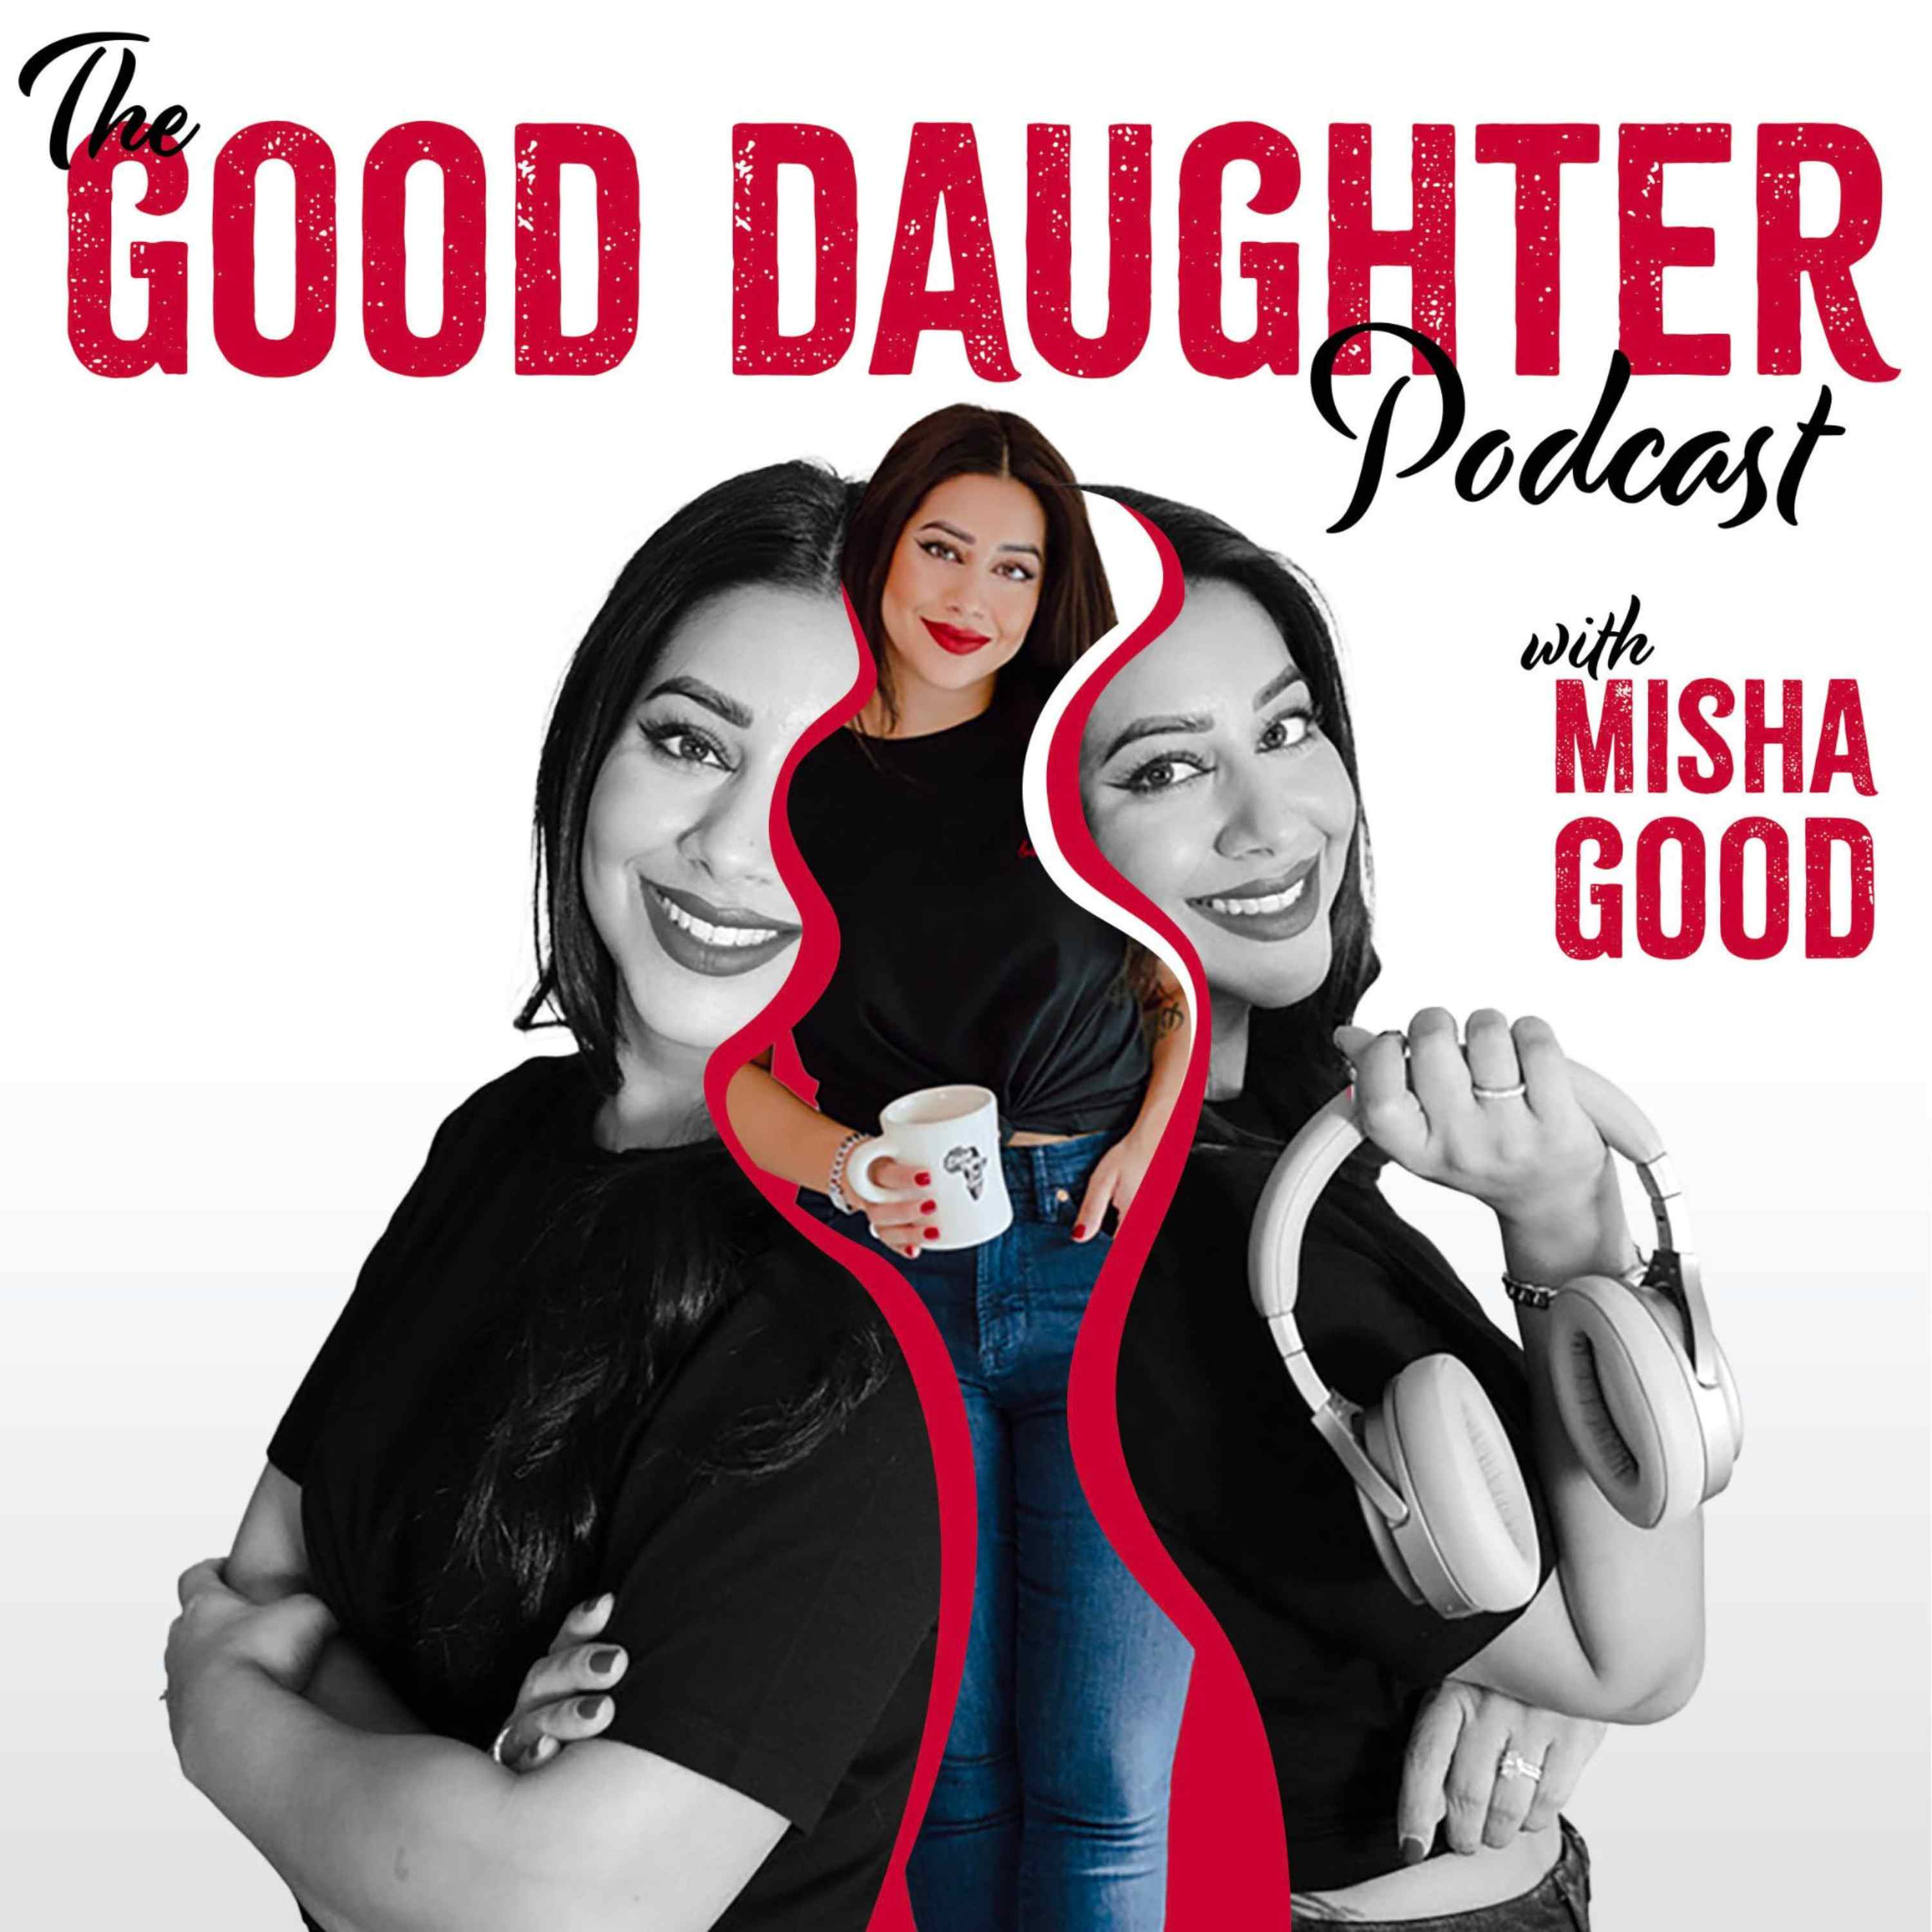 The Good Daughter Podcast